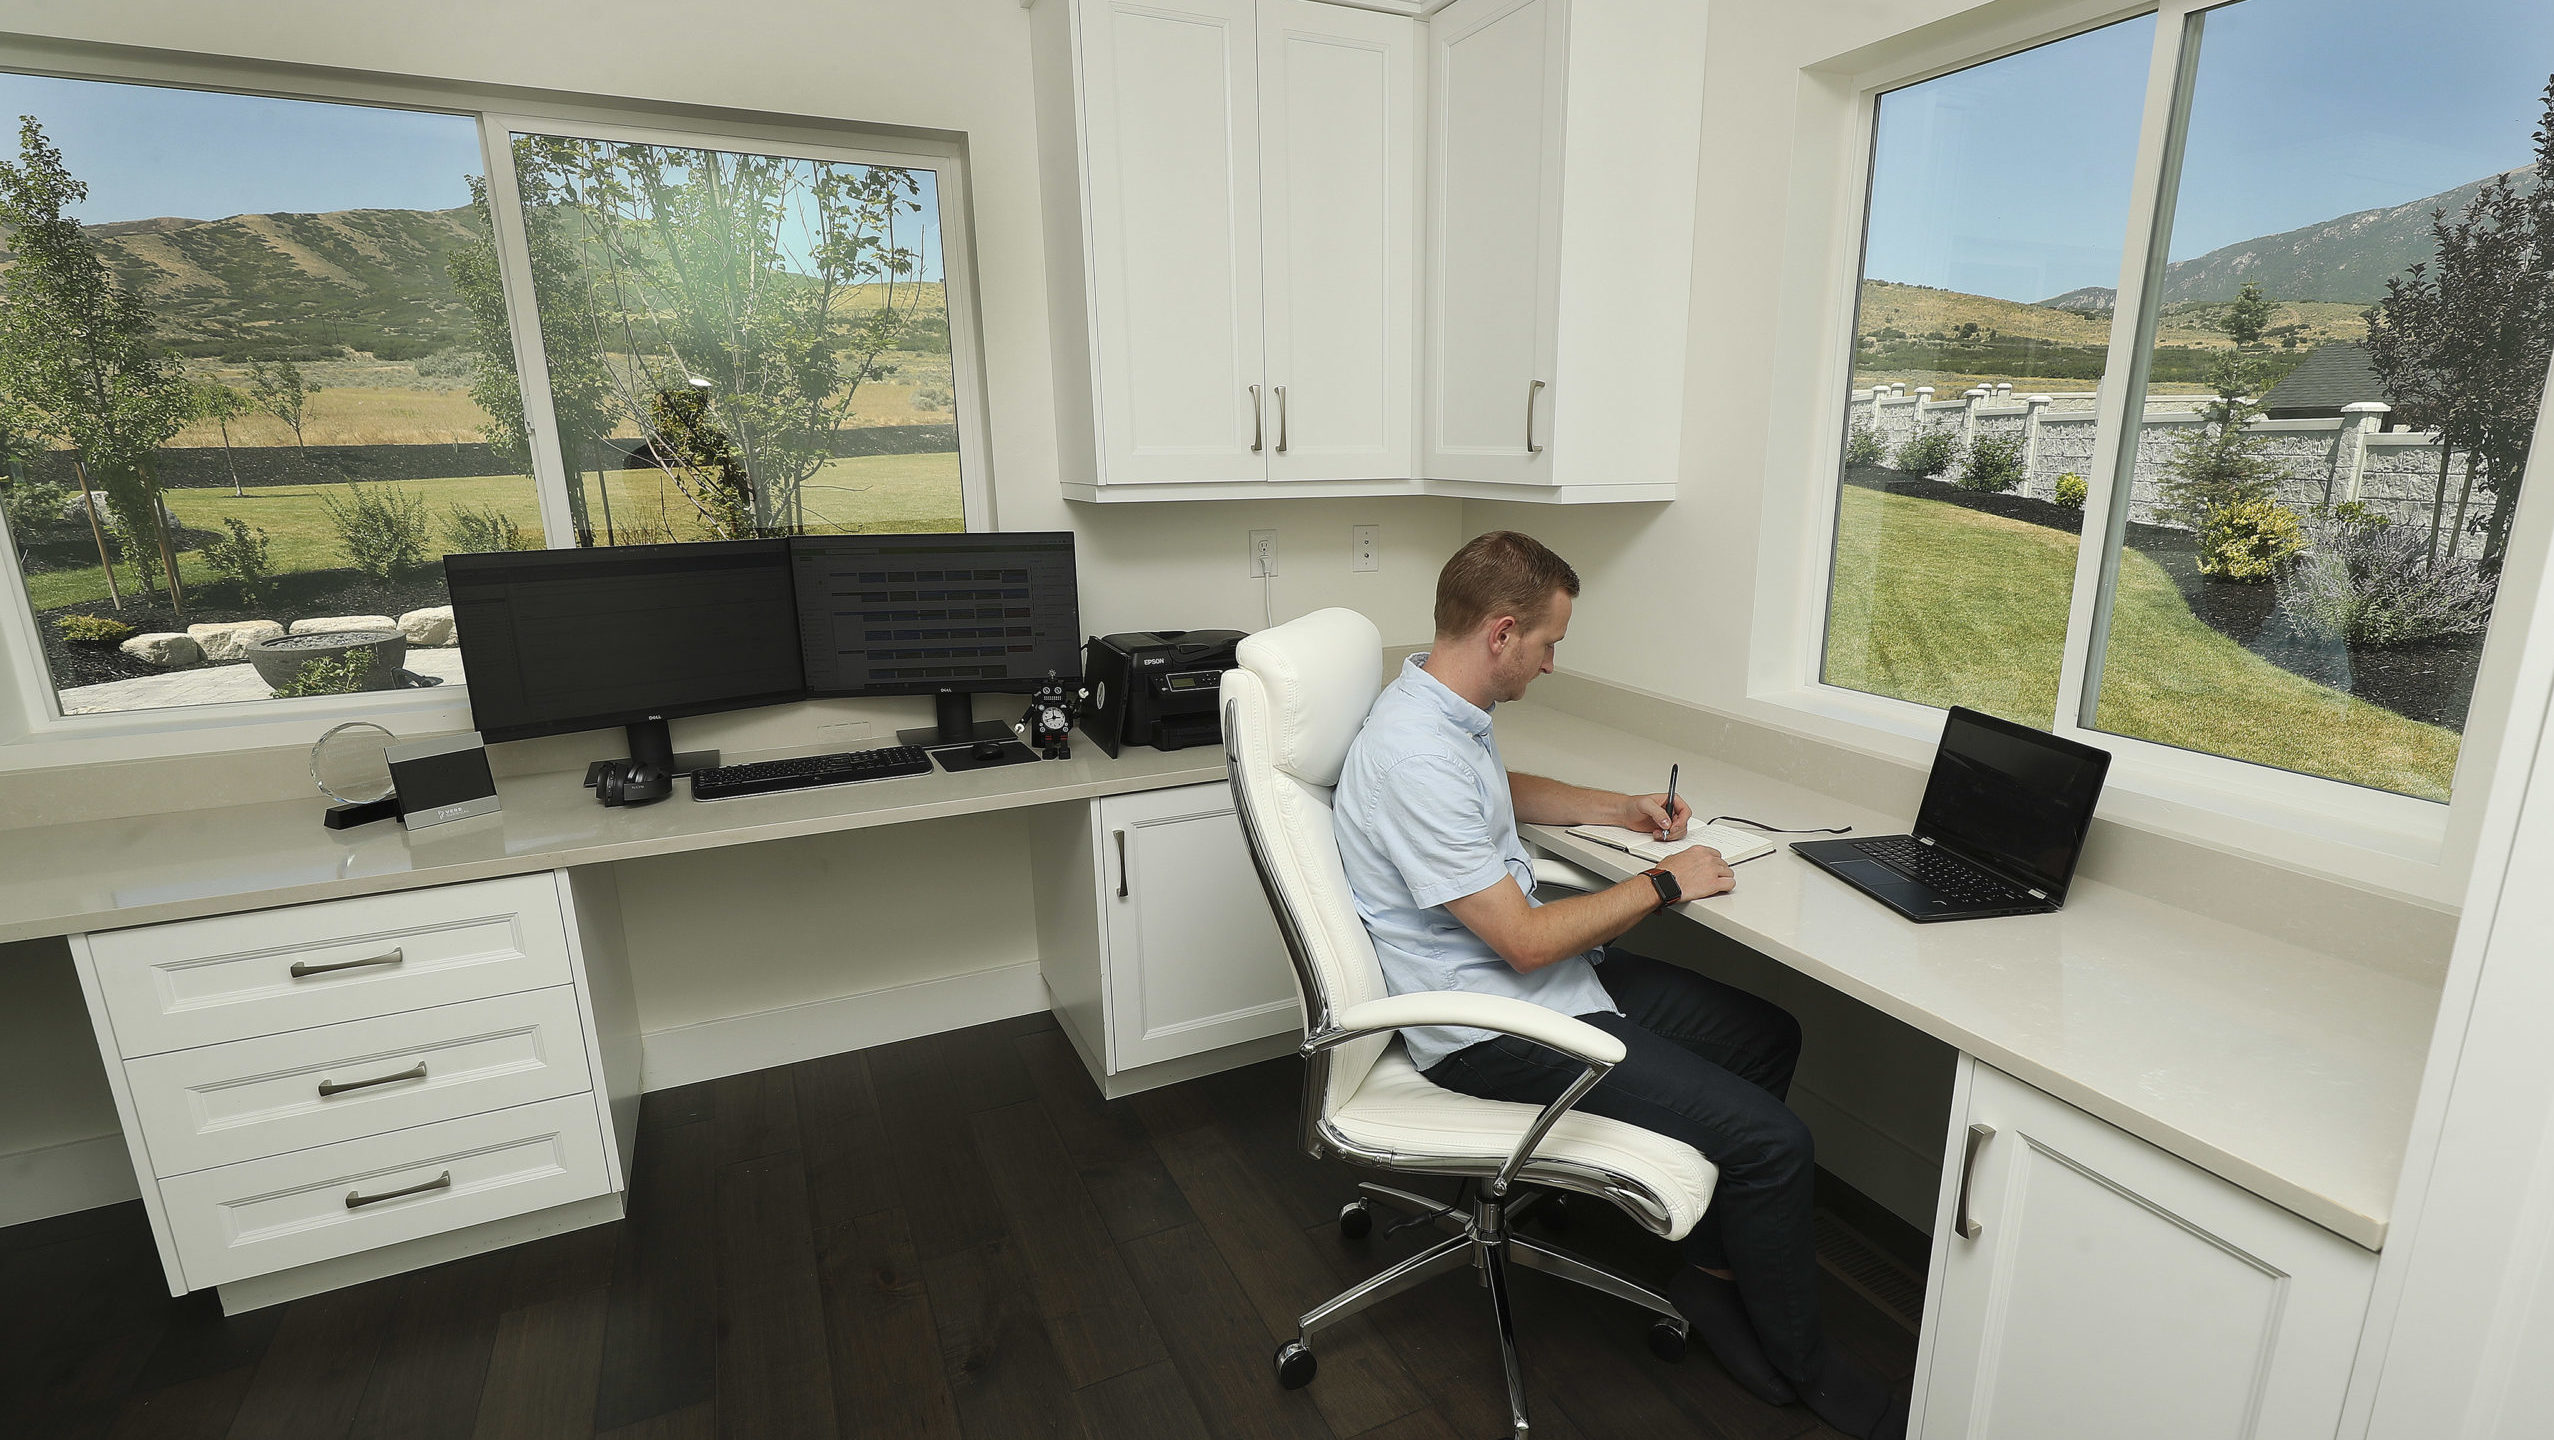 Office space may look more like this work from home setup in the future in Utah...